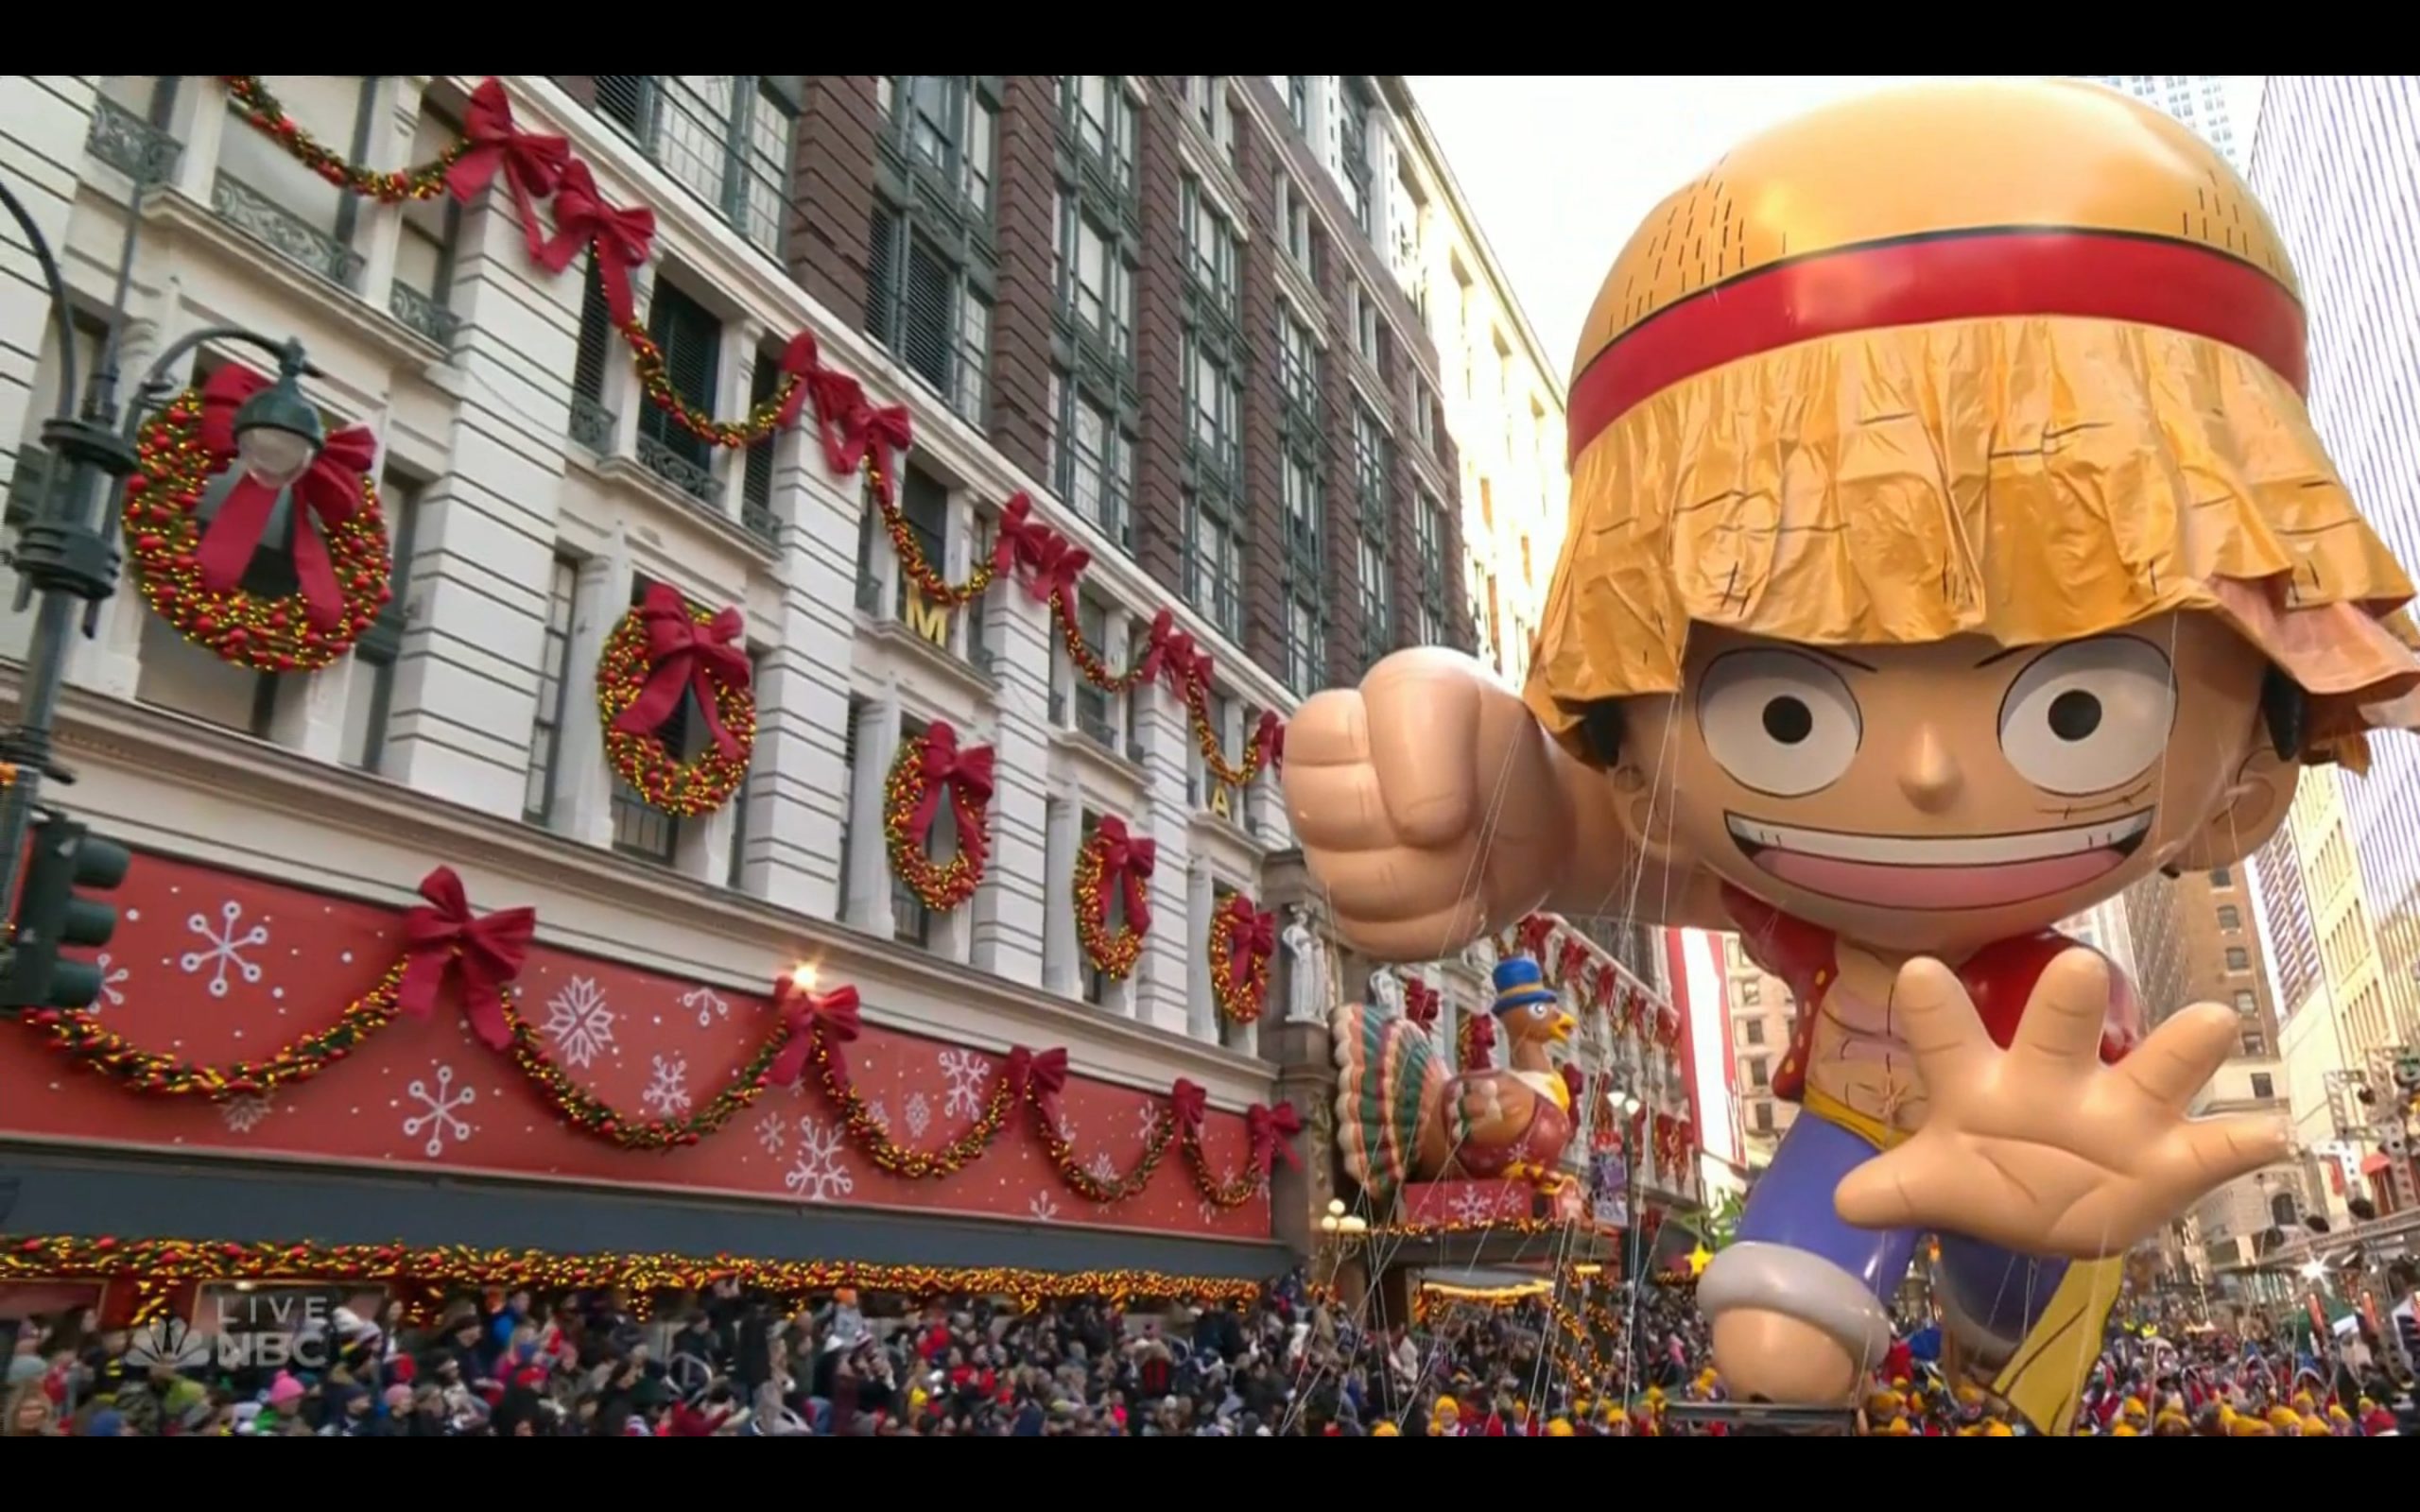 One Piece’s Luffy makes his debut at the 97th Macy’s Thanksgiving Day Parade